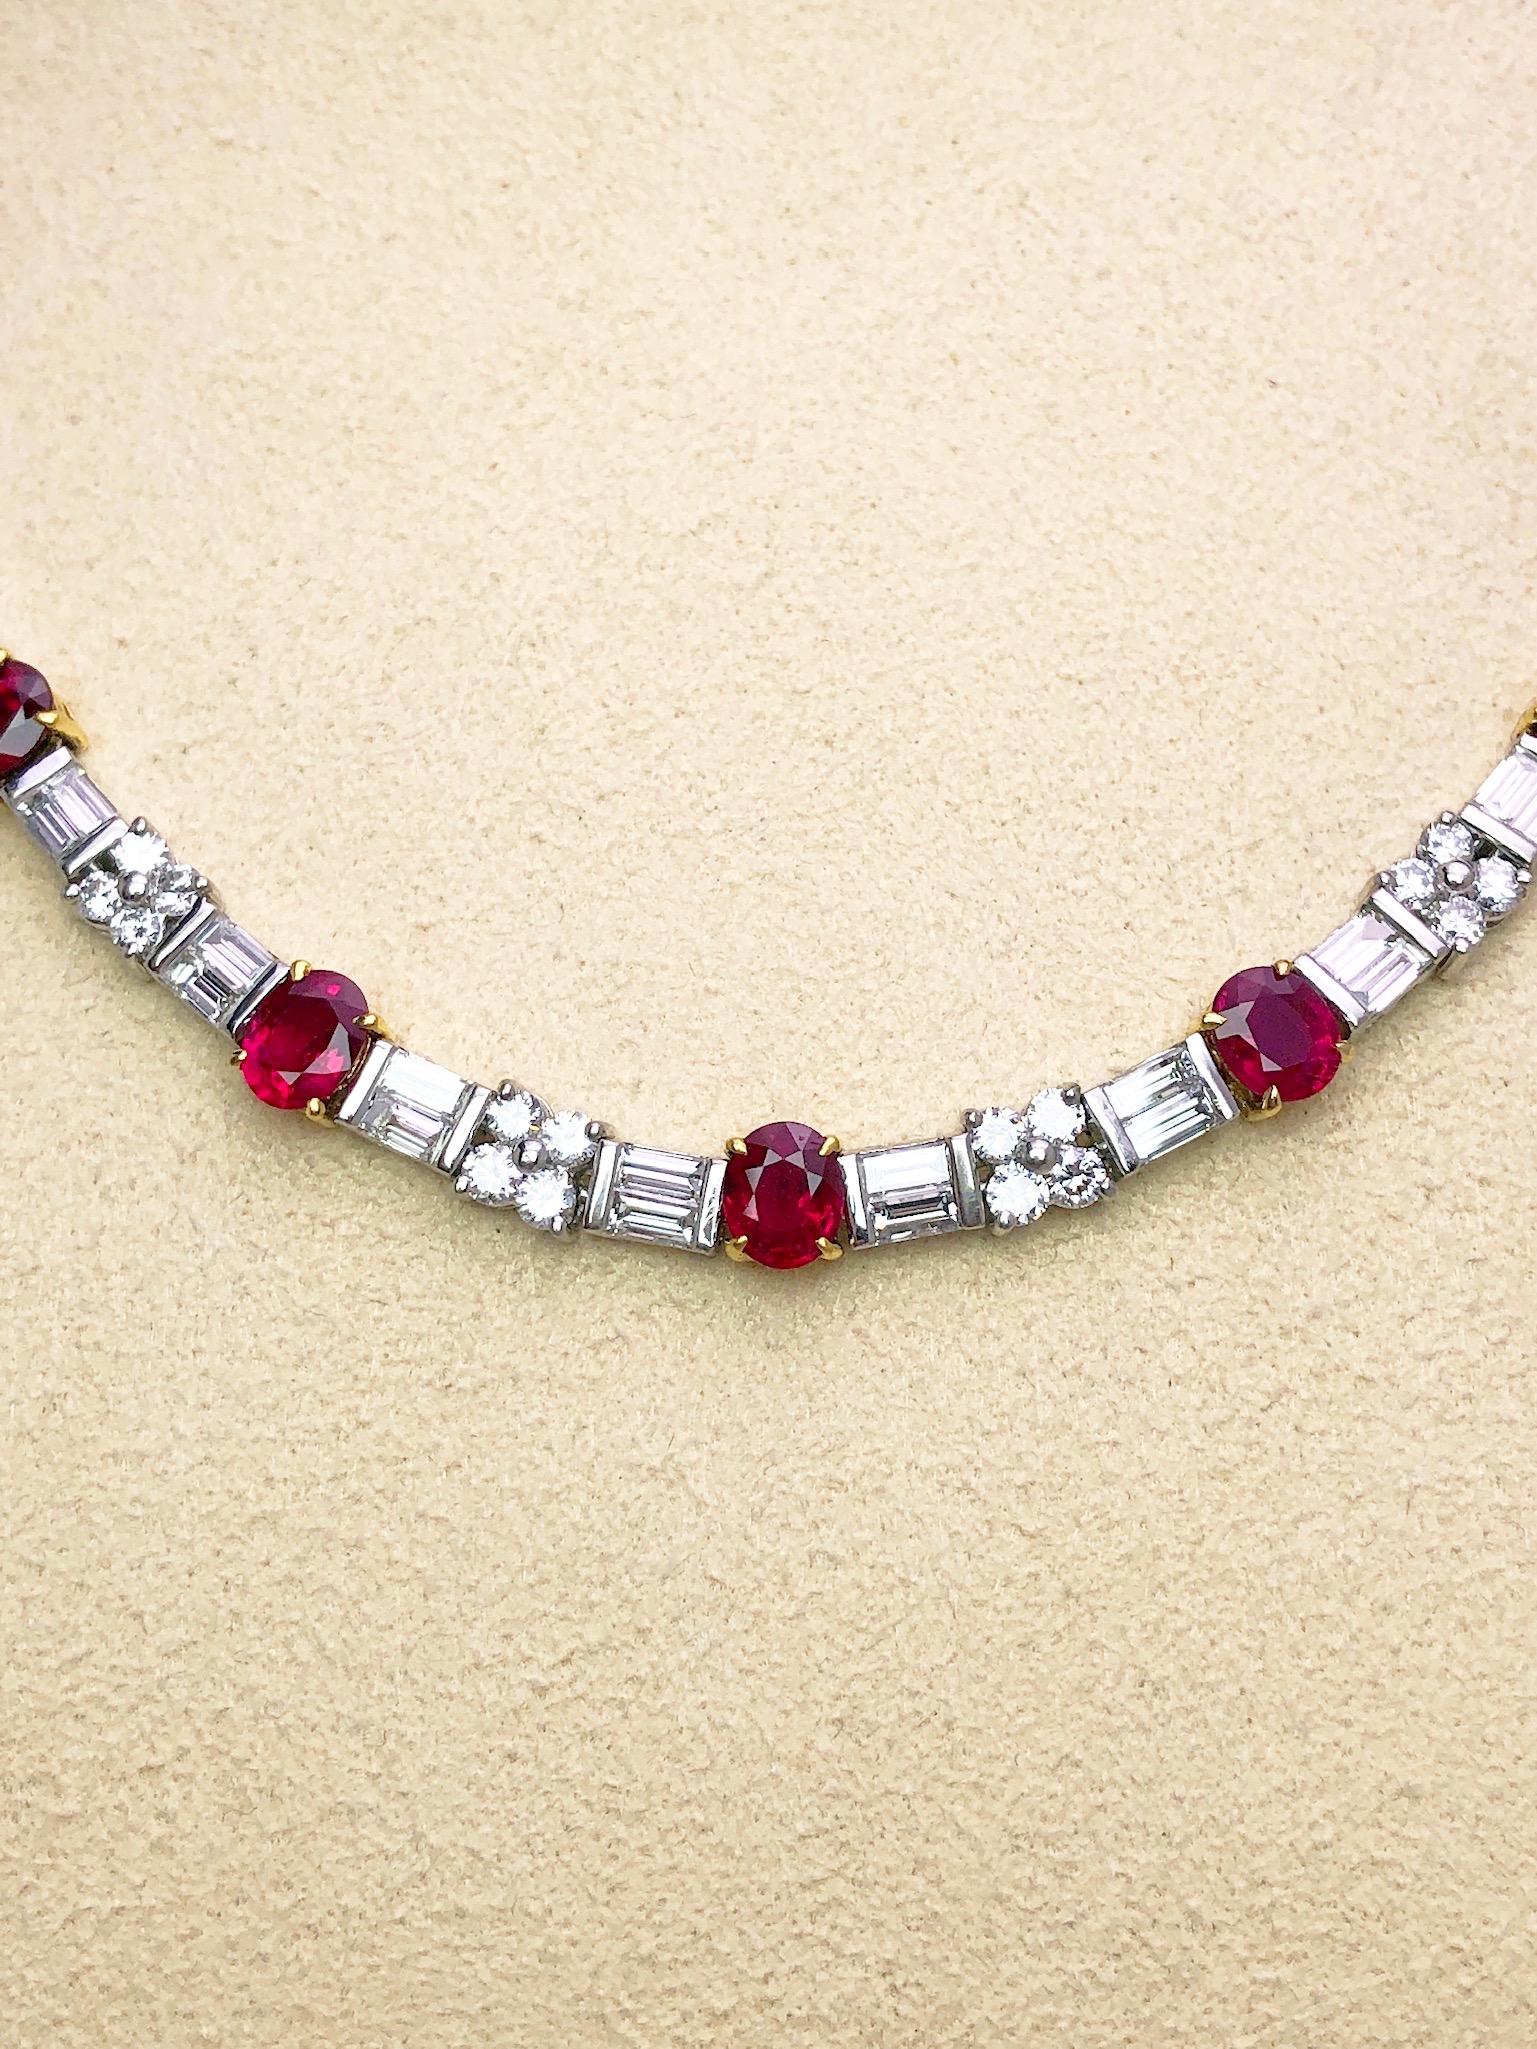 Platinum necklace set in an alternating pattern with 20 oval Rubies set in 18 kt. yellow gold. Dividing the Rubies are 4 Baguette cut and 4 Round Brilliant Diamonds that make a lovely pattern around the neck. The necklace measures 16.5